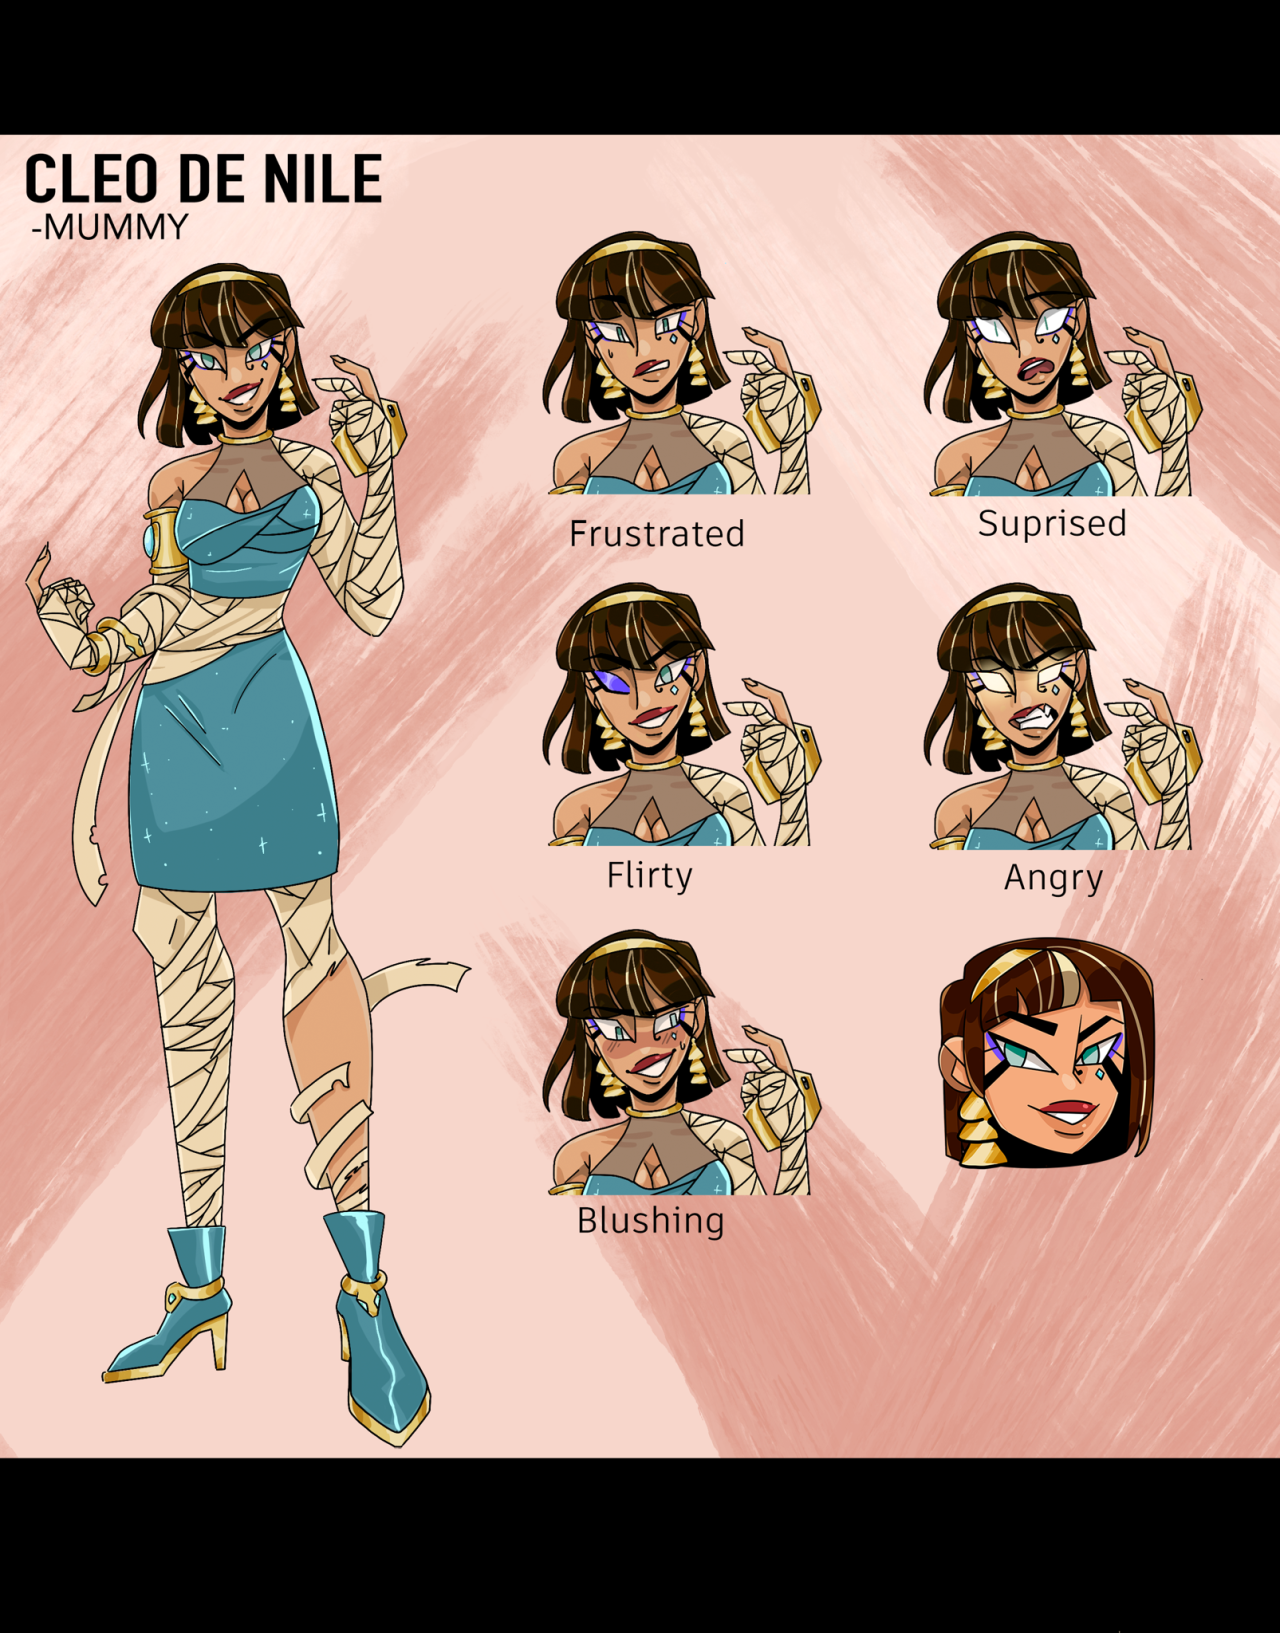 PUDIN BEAR — I'm Cleo de Nile daughter of the mummy , Egyptian...